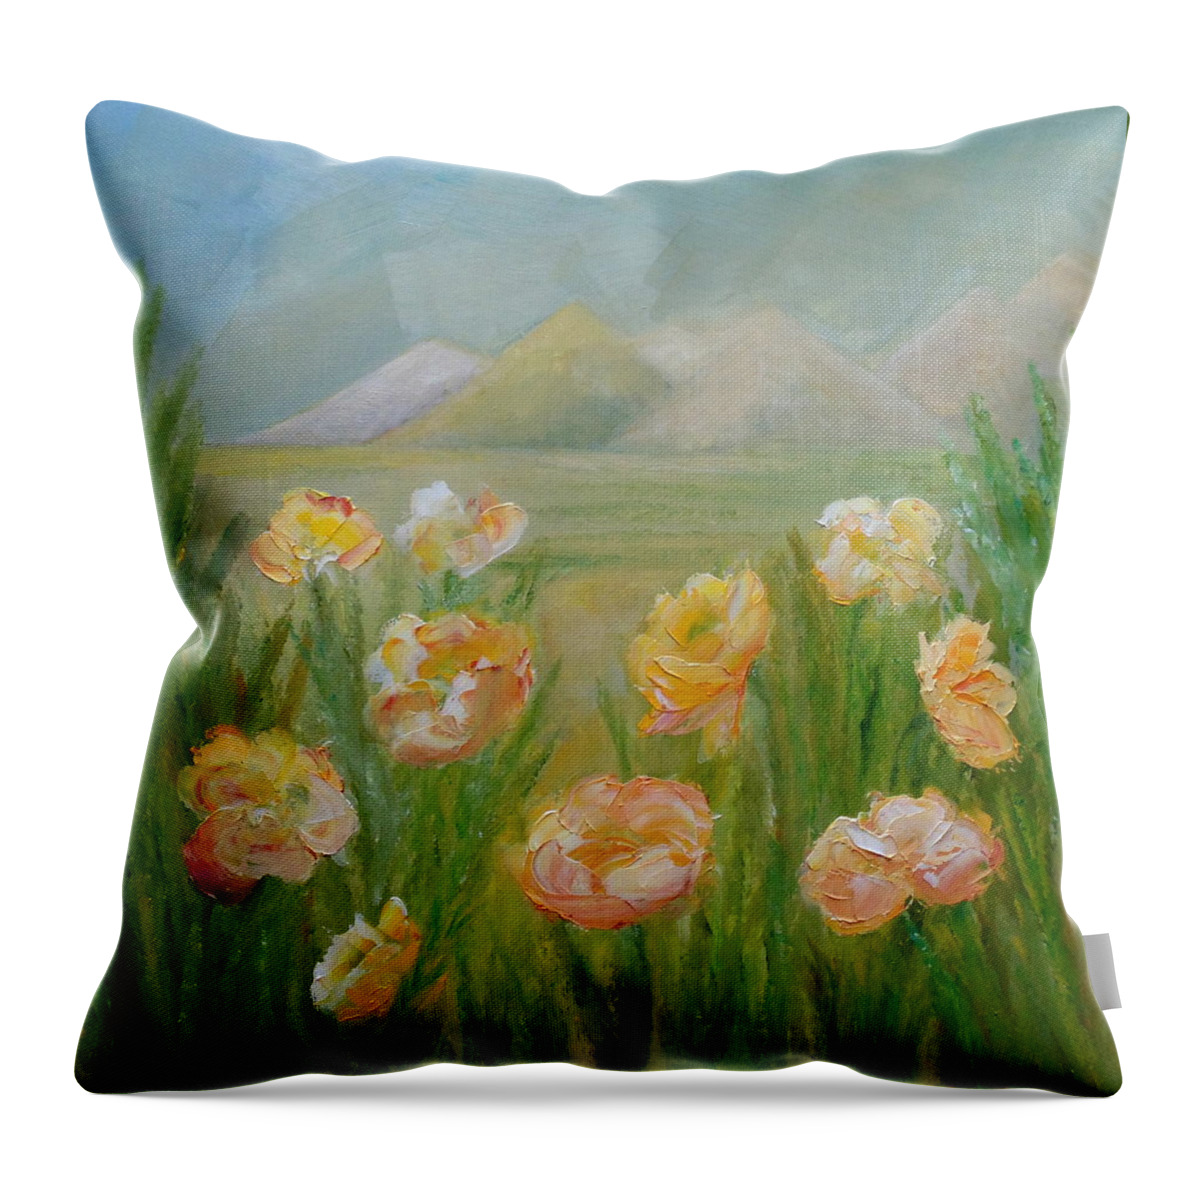 Wildflowers Throw Pillow featuring the painting Springing Joy by Angeles M Pomata